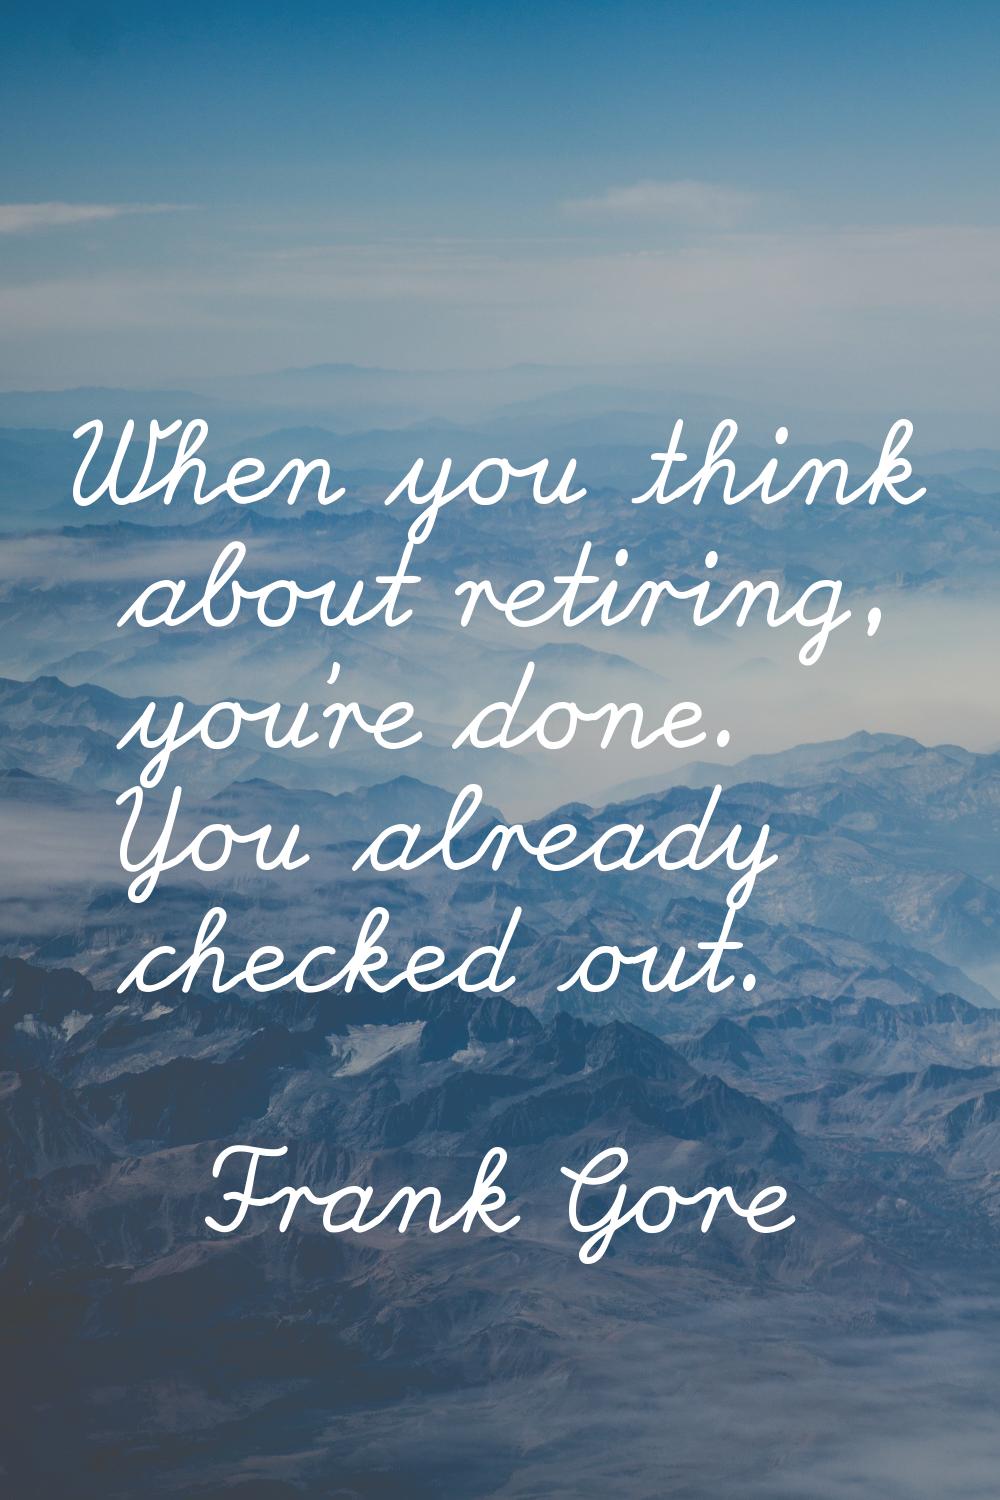 When you think about retiring, you're done. You already checked out.